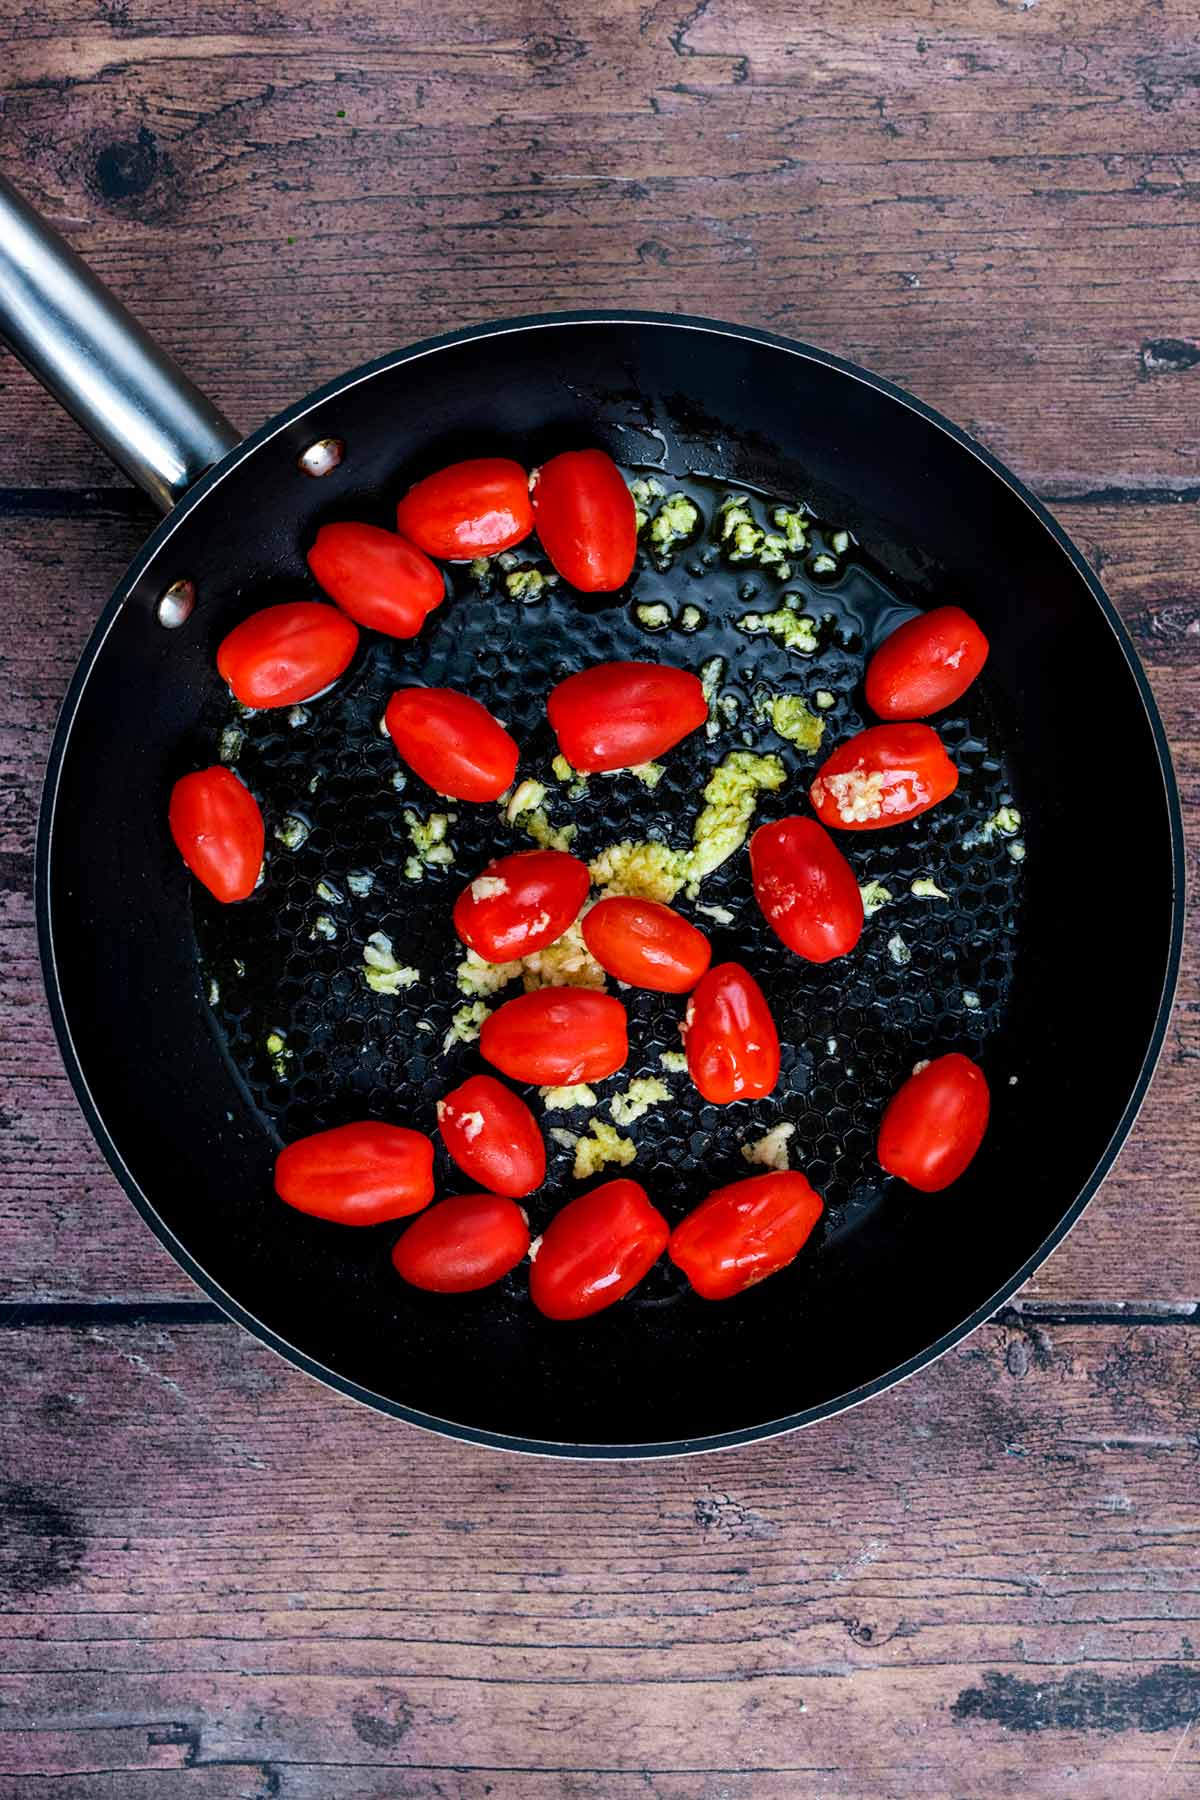 Cherry tomatoes and crushed garlic cooking in a black frying pan.